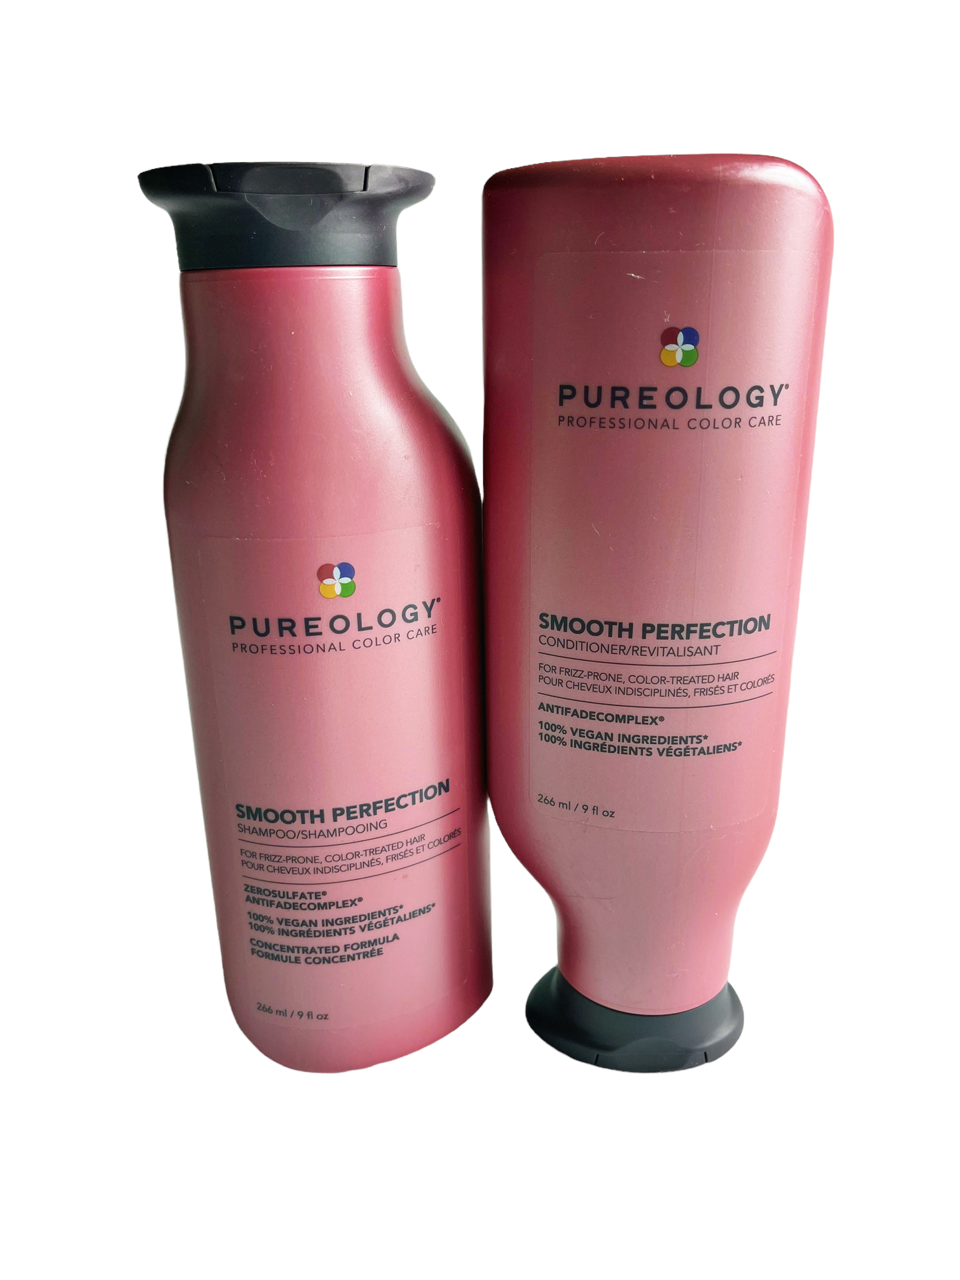 New Pureology Smooth Perfection Shampoo and Conditioner | 9 Fl Oz Each | Vegan - $44.09